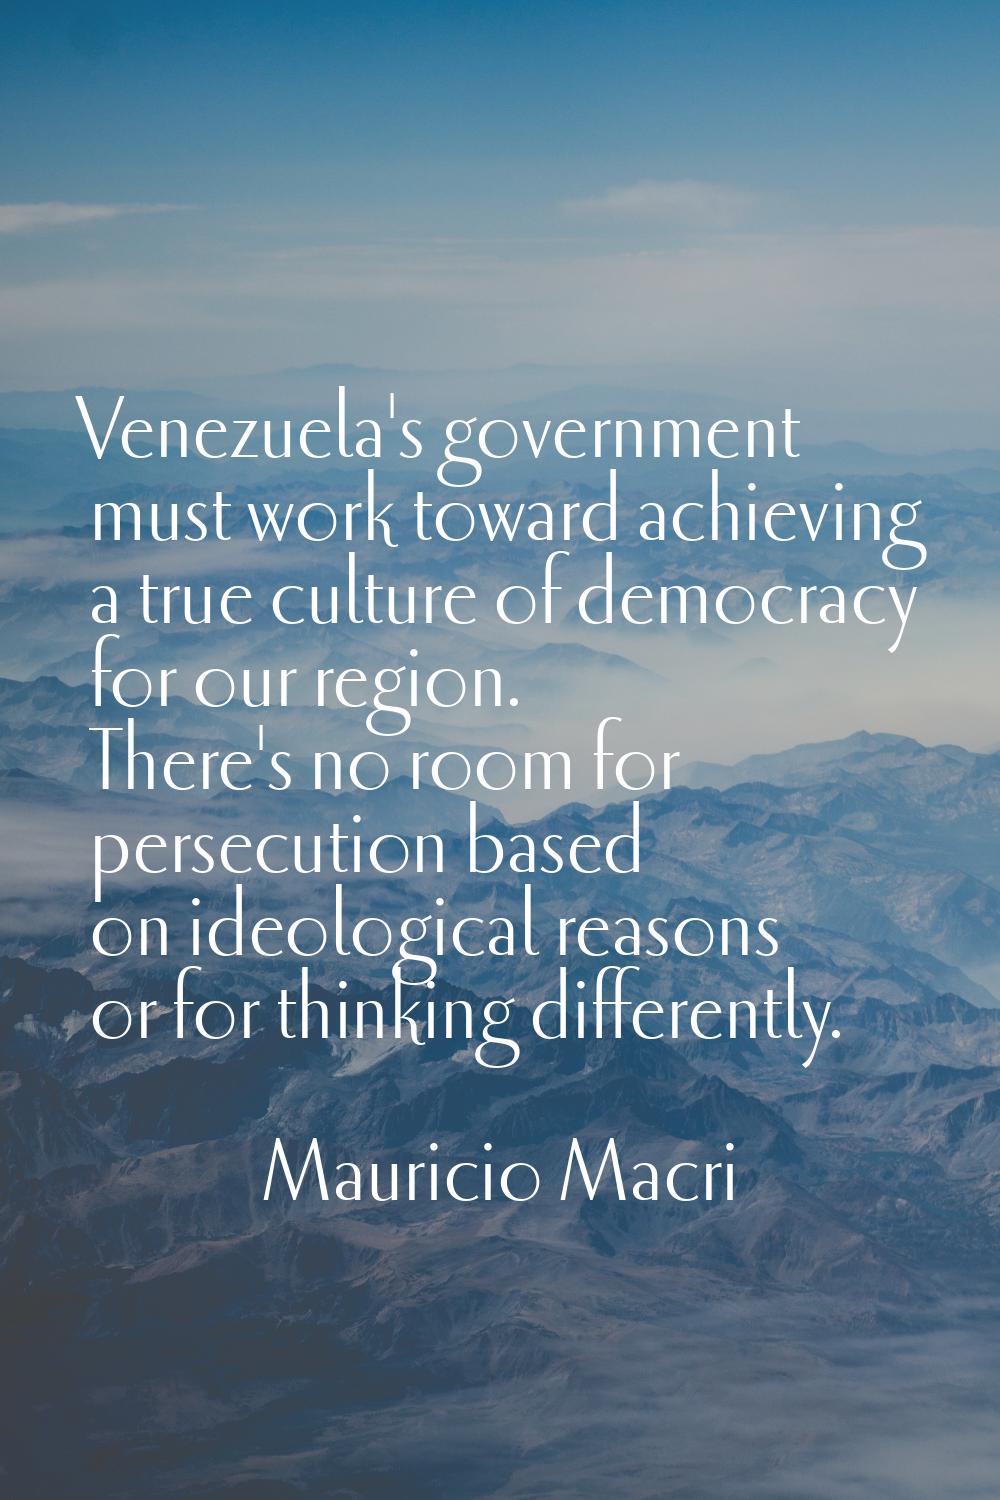 Venezuela's government must work toward achieving a true culture of democracy for our region. There